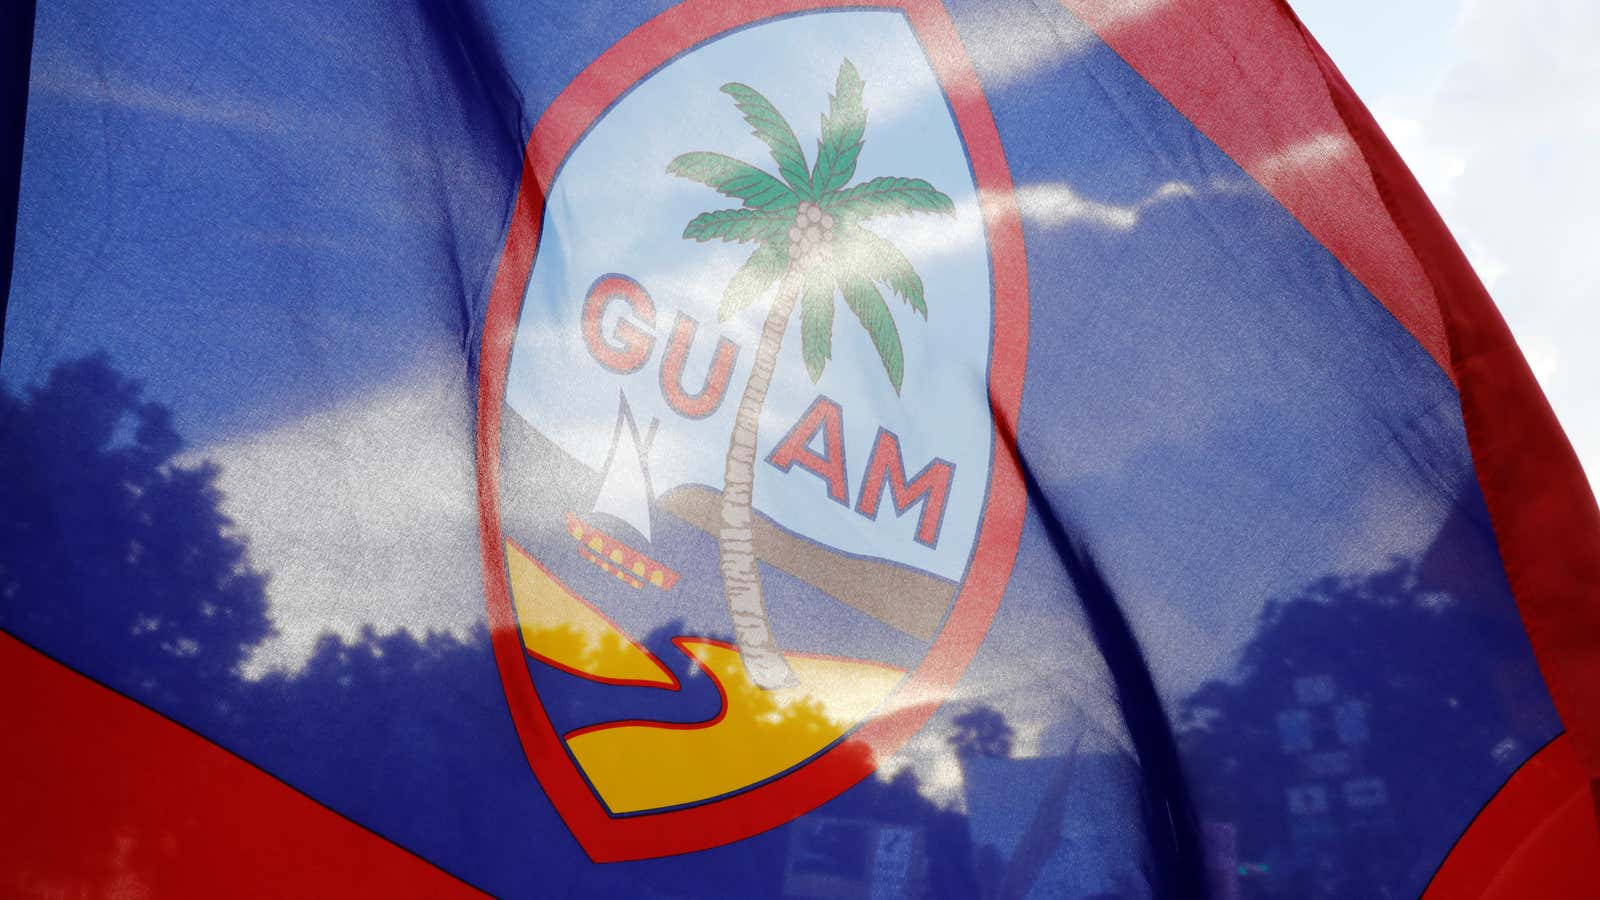 Guam, a destination for vacations and… telecommunications?